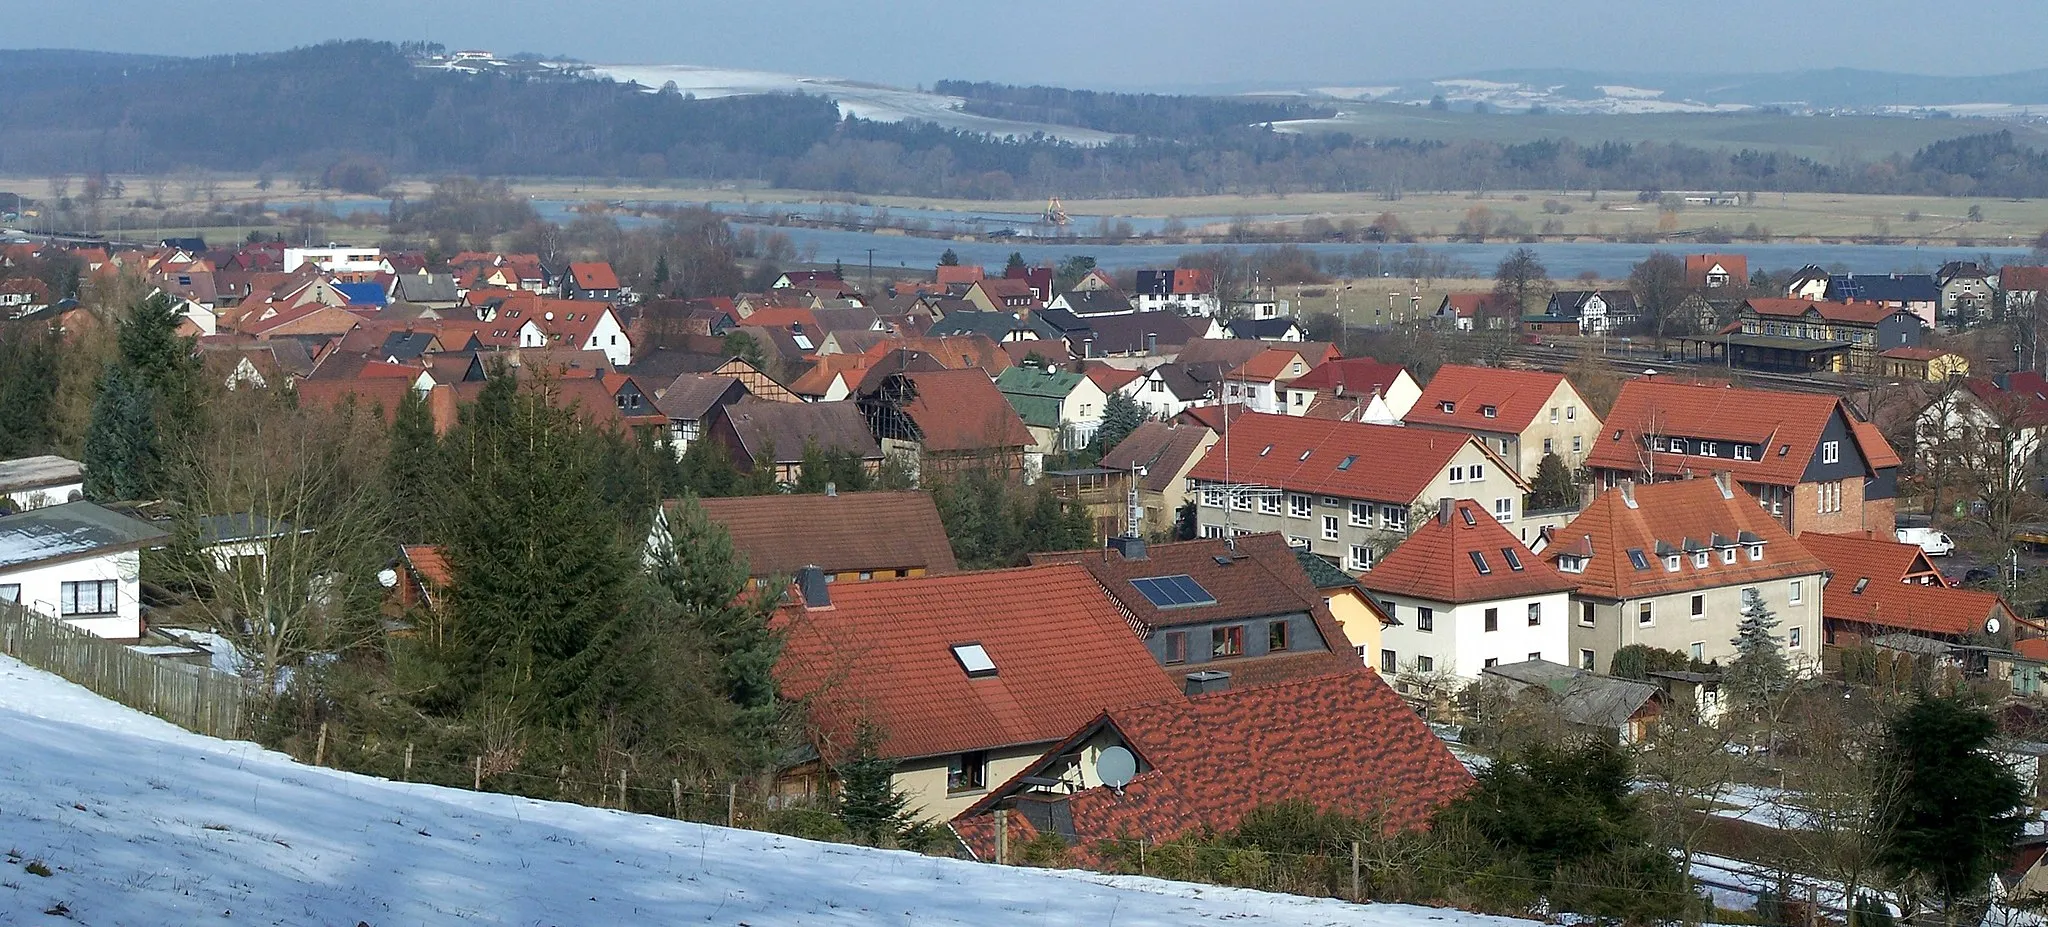 Photo showing: The middle area of  Immelborn village.